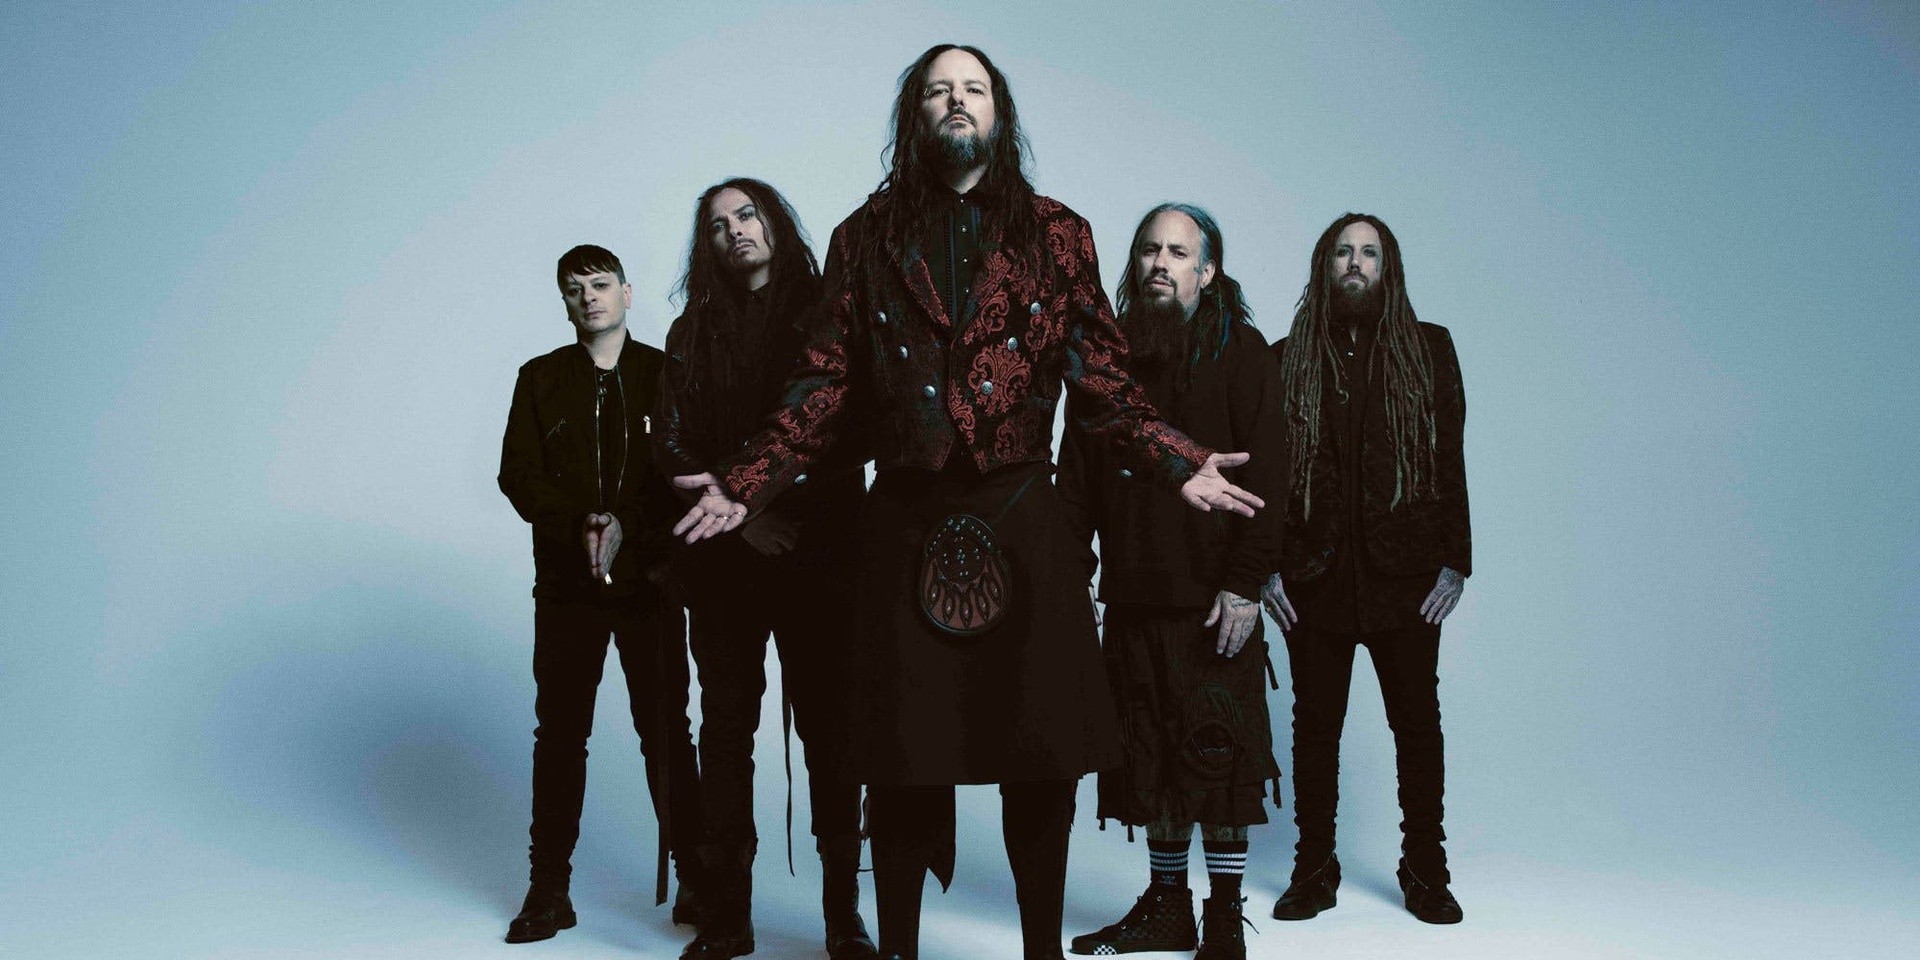 Korn's 13th album, The Nothing, is out now